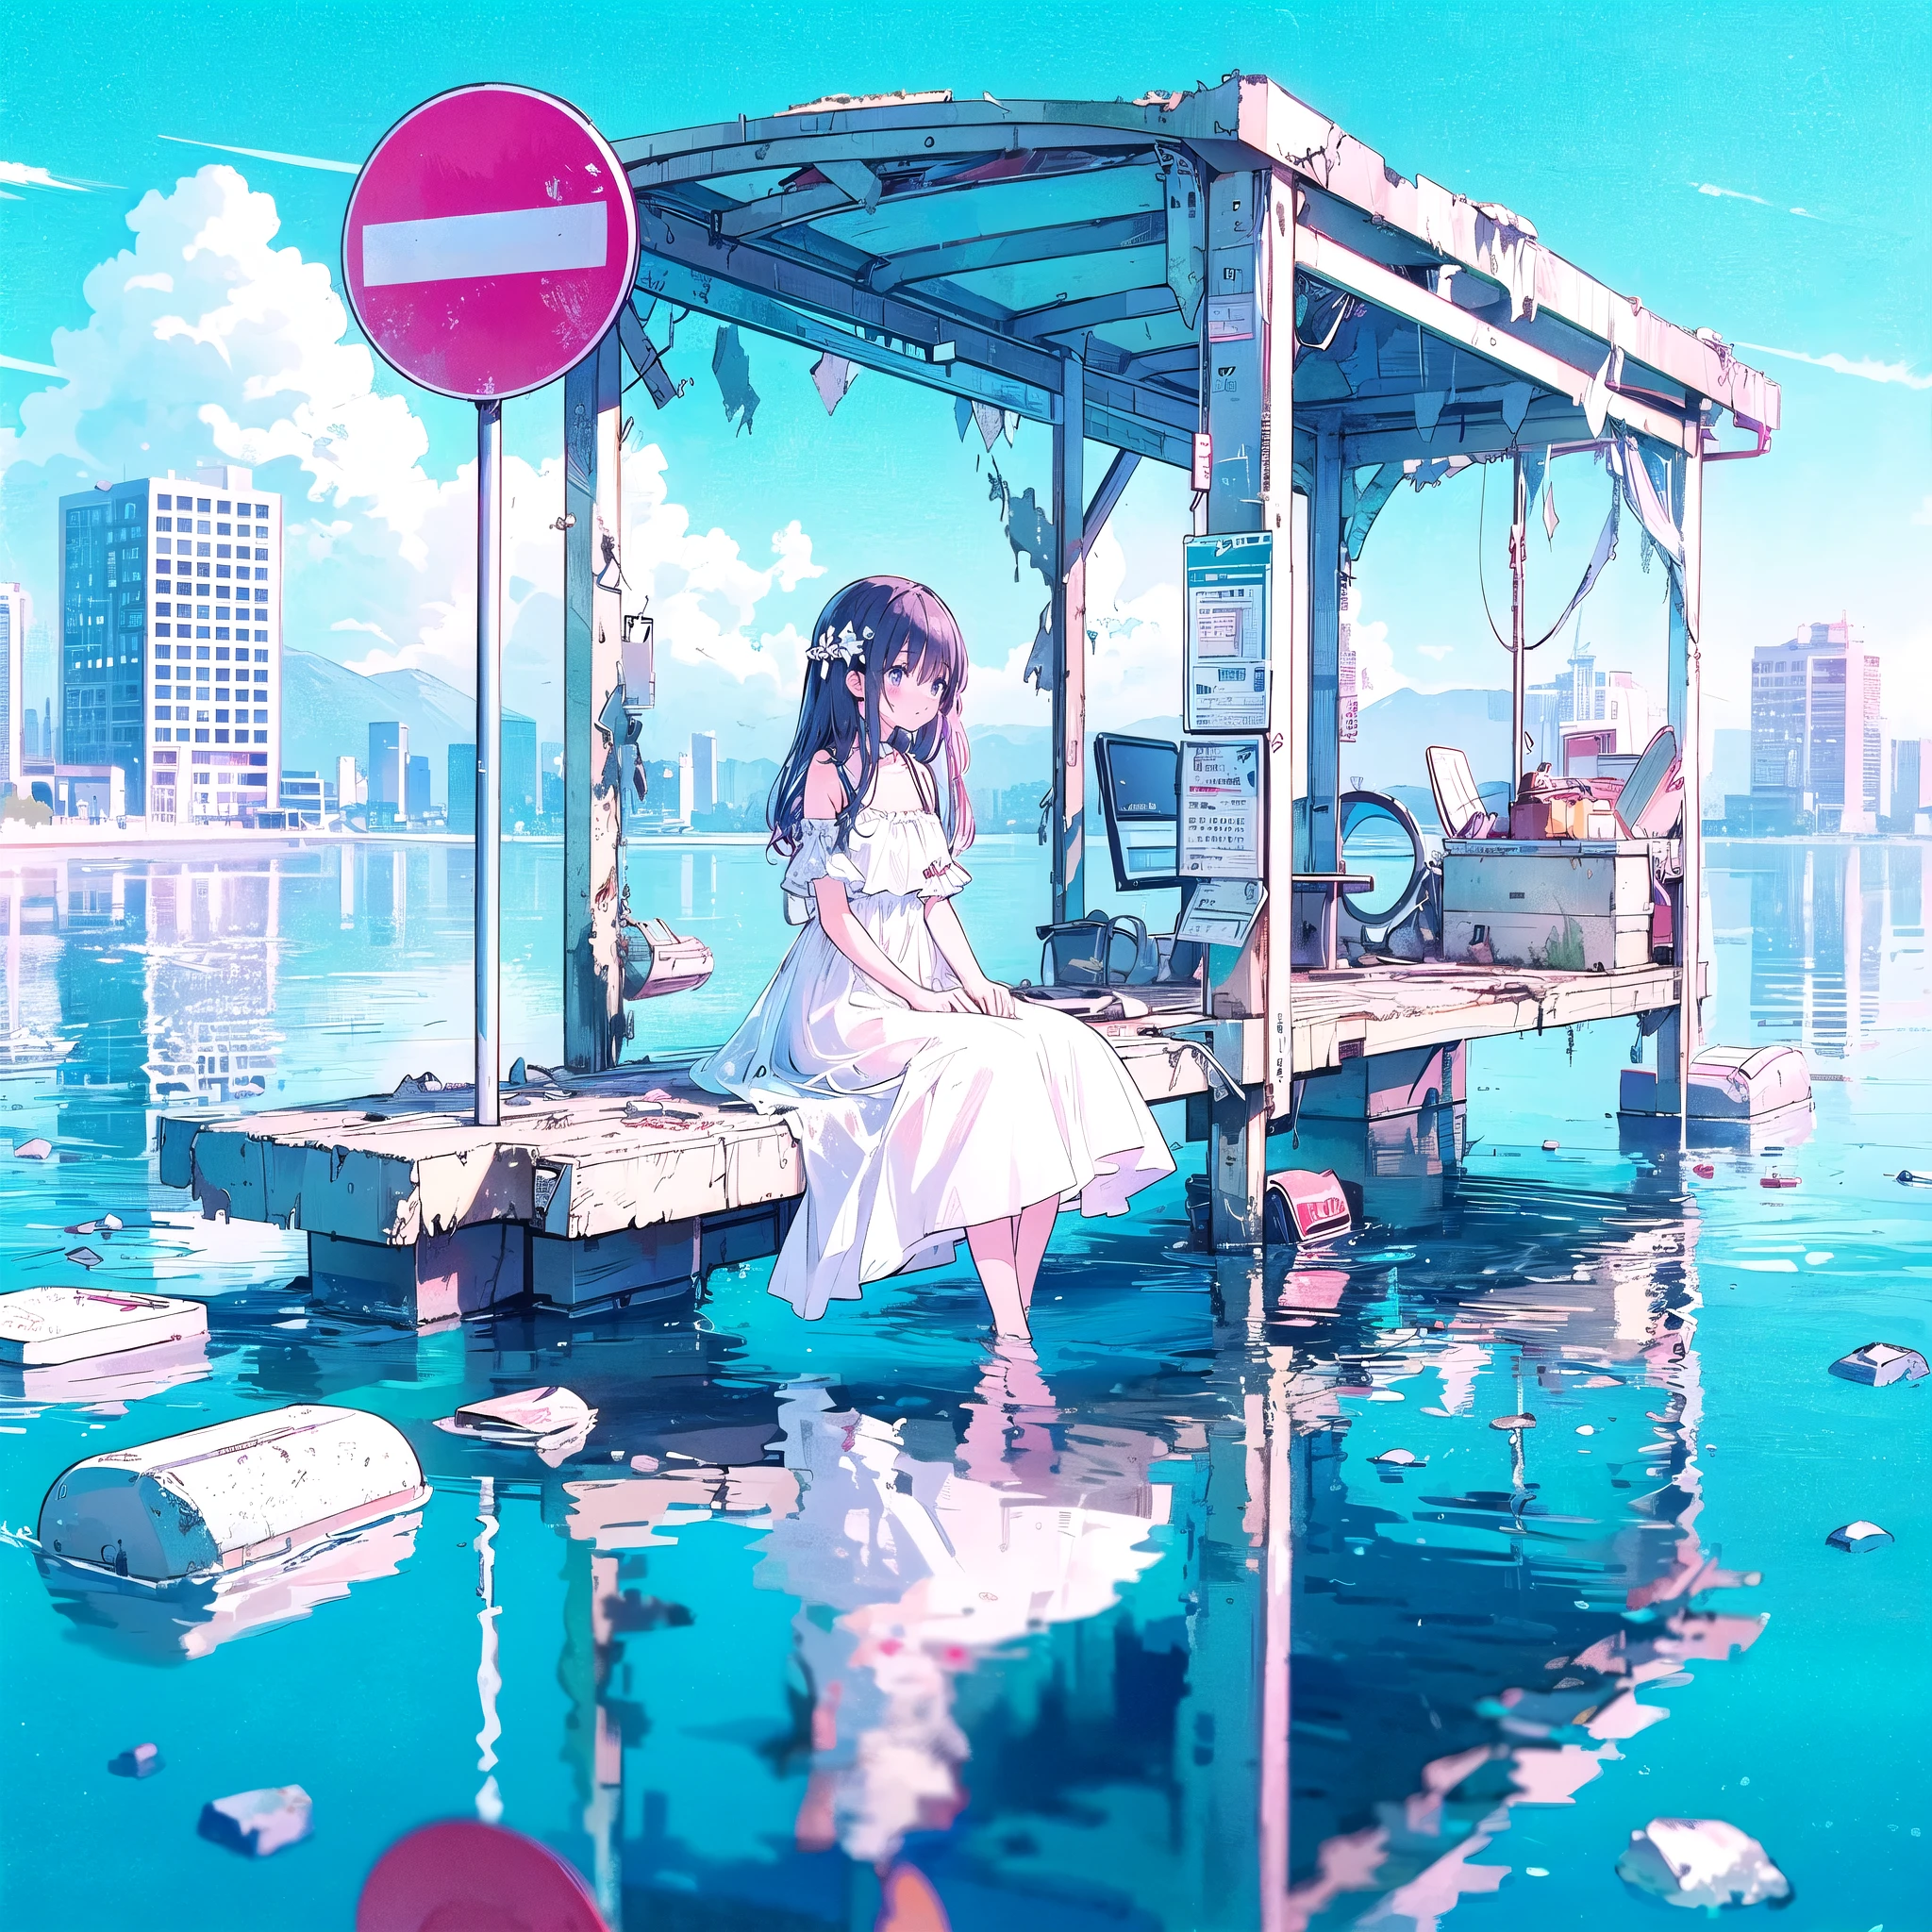 masterpiece, best quality, high resolution, extremely detailed CG, Post-apocalyptic, a girl in a white dress on a broken white platform on the sea,  a deserted bus stop on the platform, a few pieces of concrete scattered in the water, blue sky, fresh, simple, pastel colors